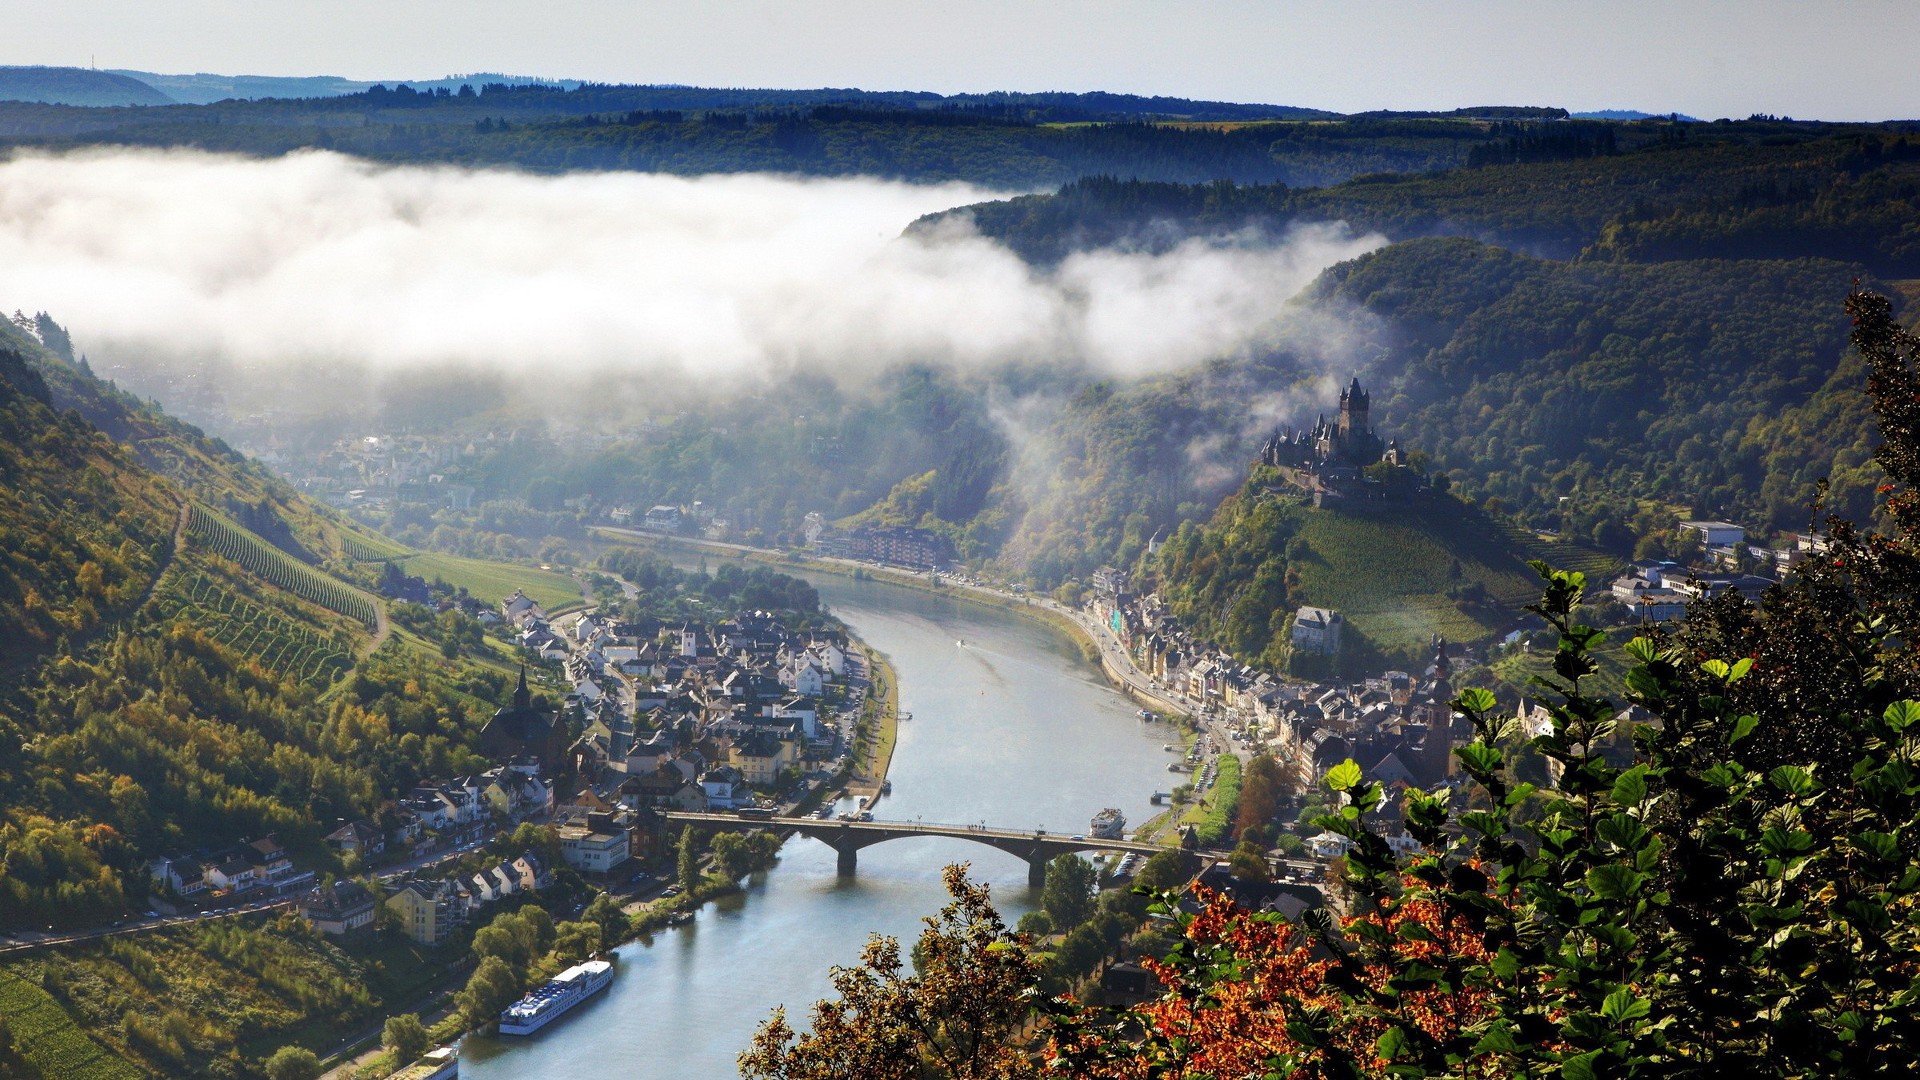 General 1920x1080 river bridge Germany town nature landscape hills mountains valley house church castle trees forest mist leaves vineyard ship aerial view